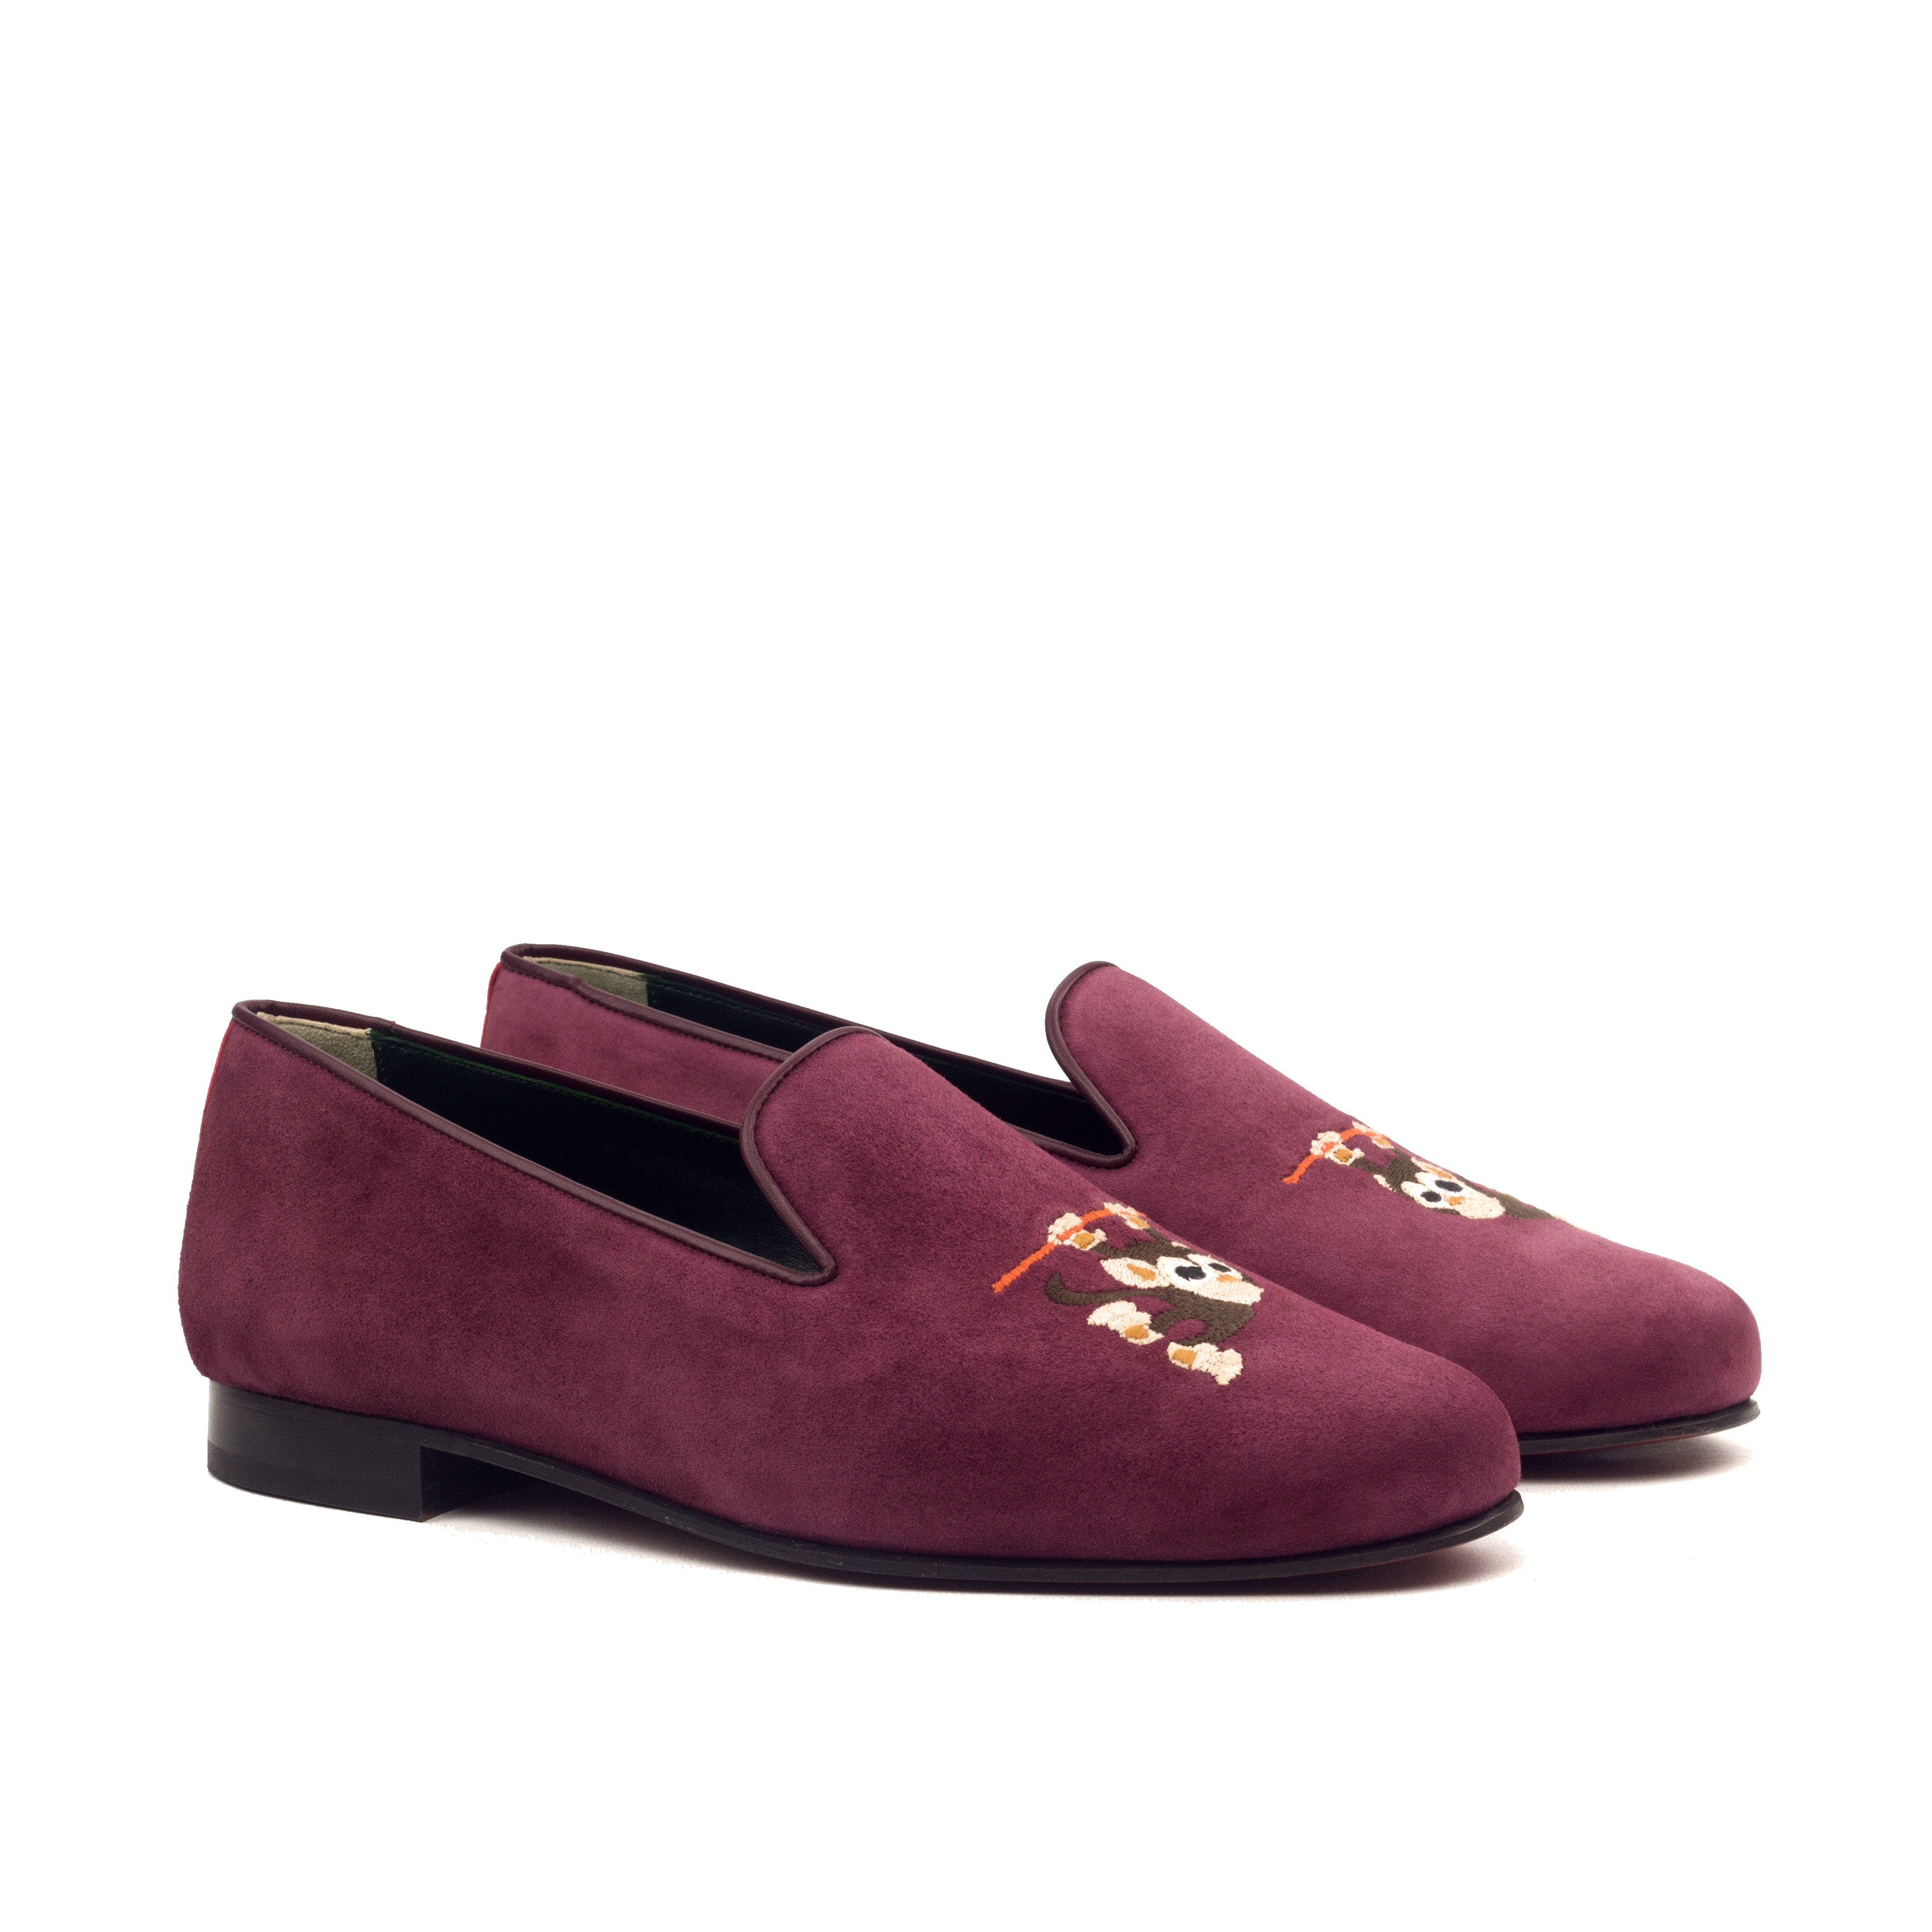 Manor of London 'Monkeying Around' Wine  Suede Leather Luxury Slip On Slippers Front Side View